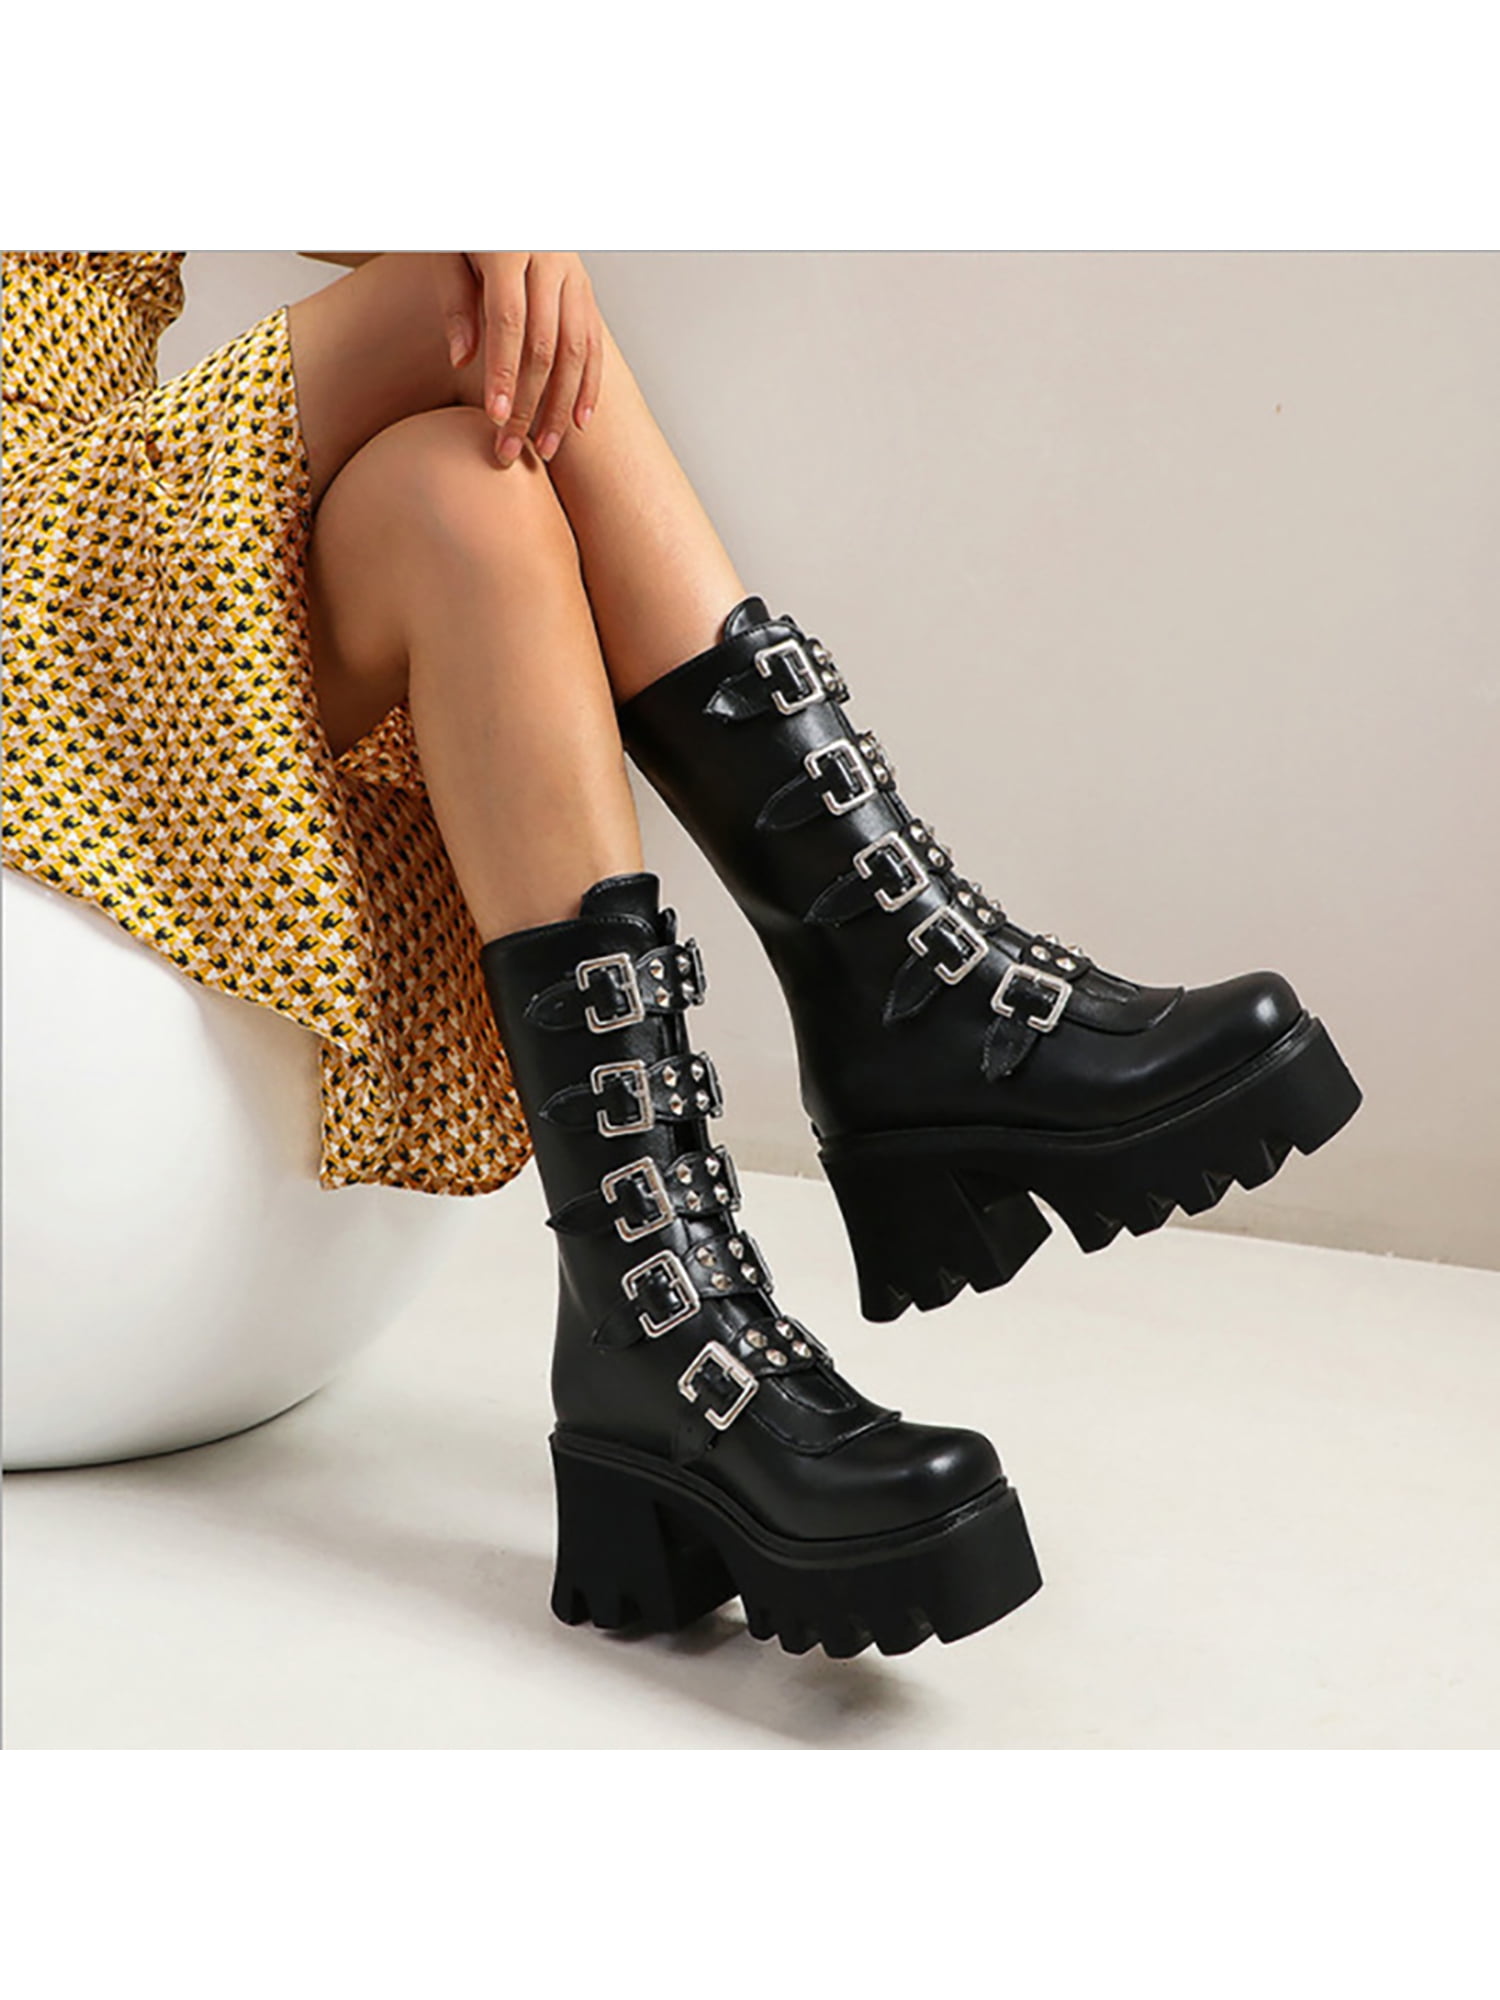 Women's Zip Lace up Strap Ankle Boots High Chunky Heel Platform Round Toe Shoes 